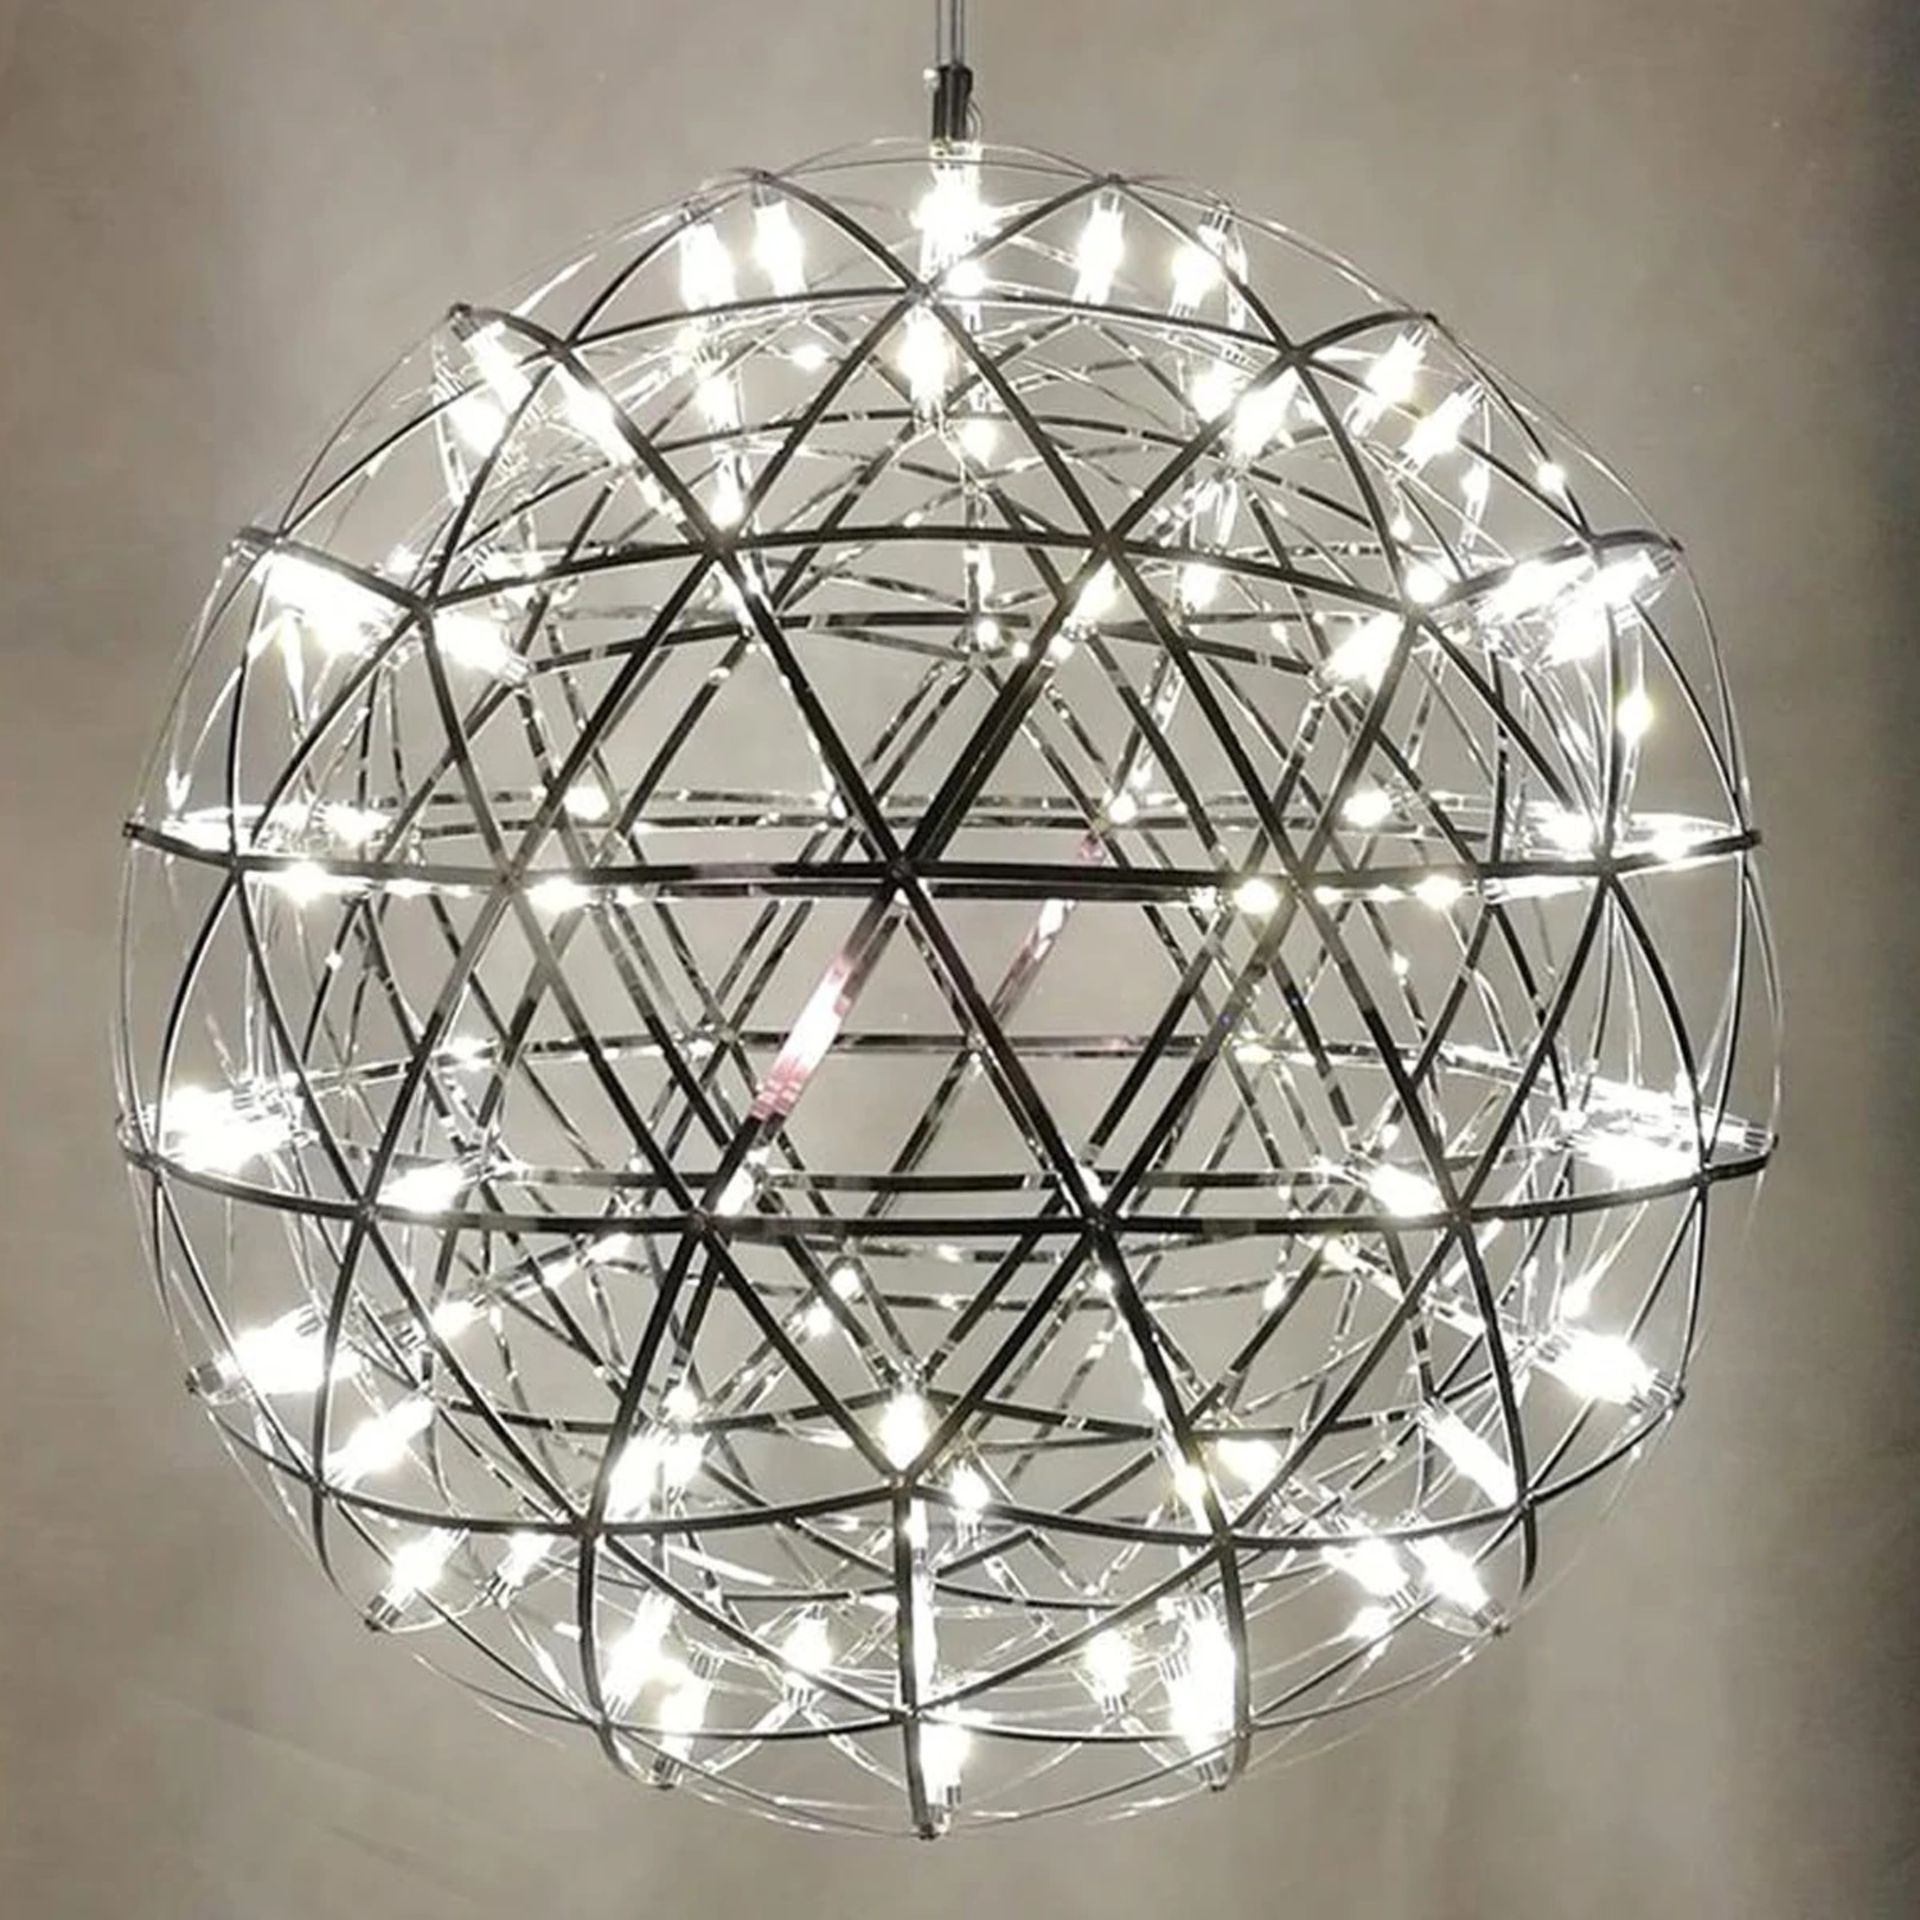 Starburst Extra Large Hanging Pendant 150cm diameter lights with its chrome bodied spherical globe - Image 2 of 3